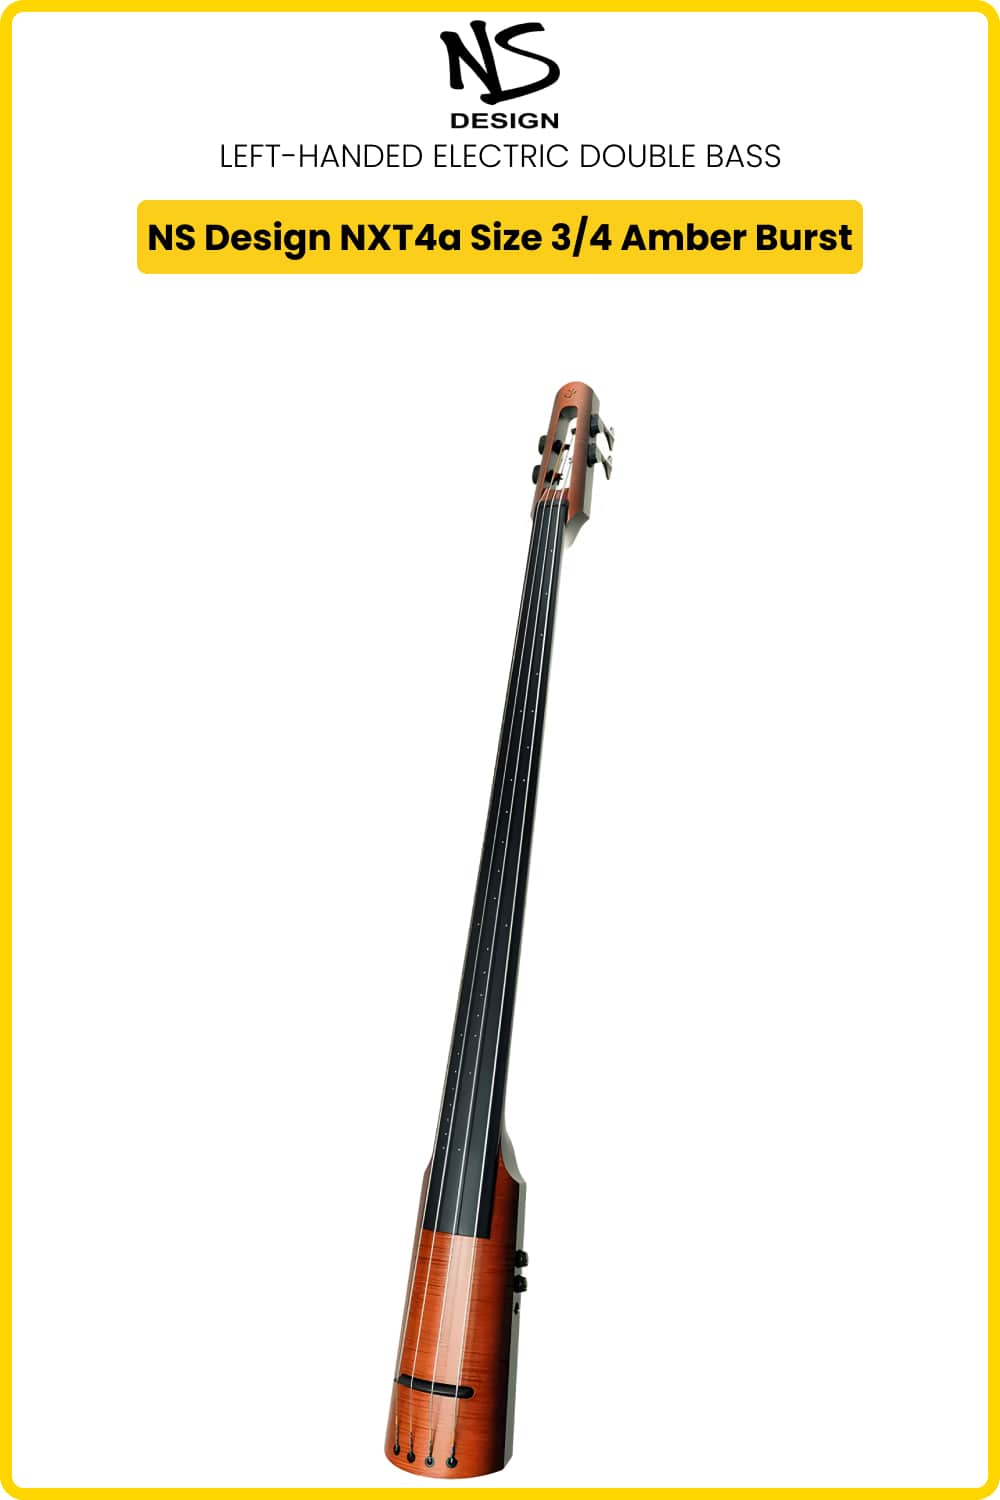 Left-Handed Electric Double Bass NS Design NXR4a Amber Burst